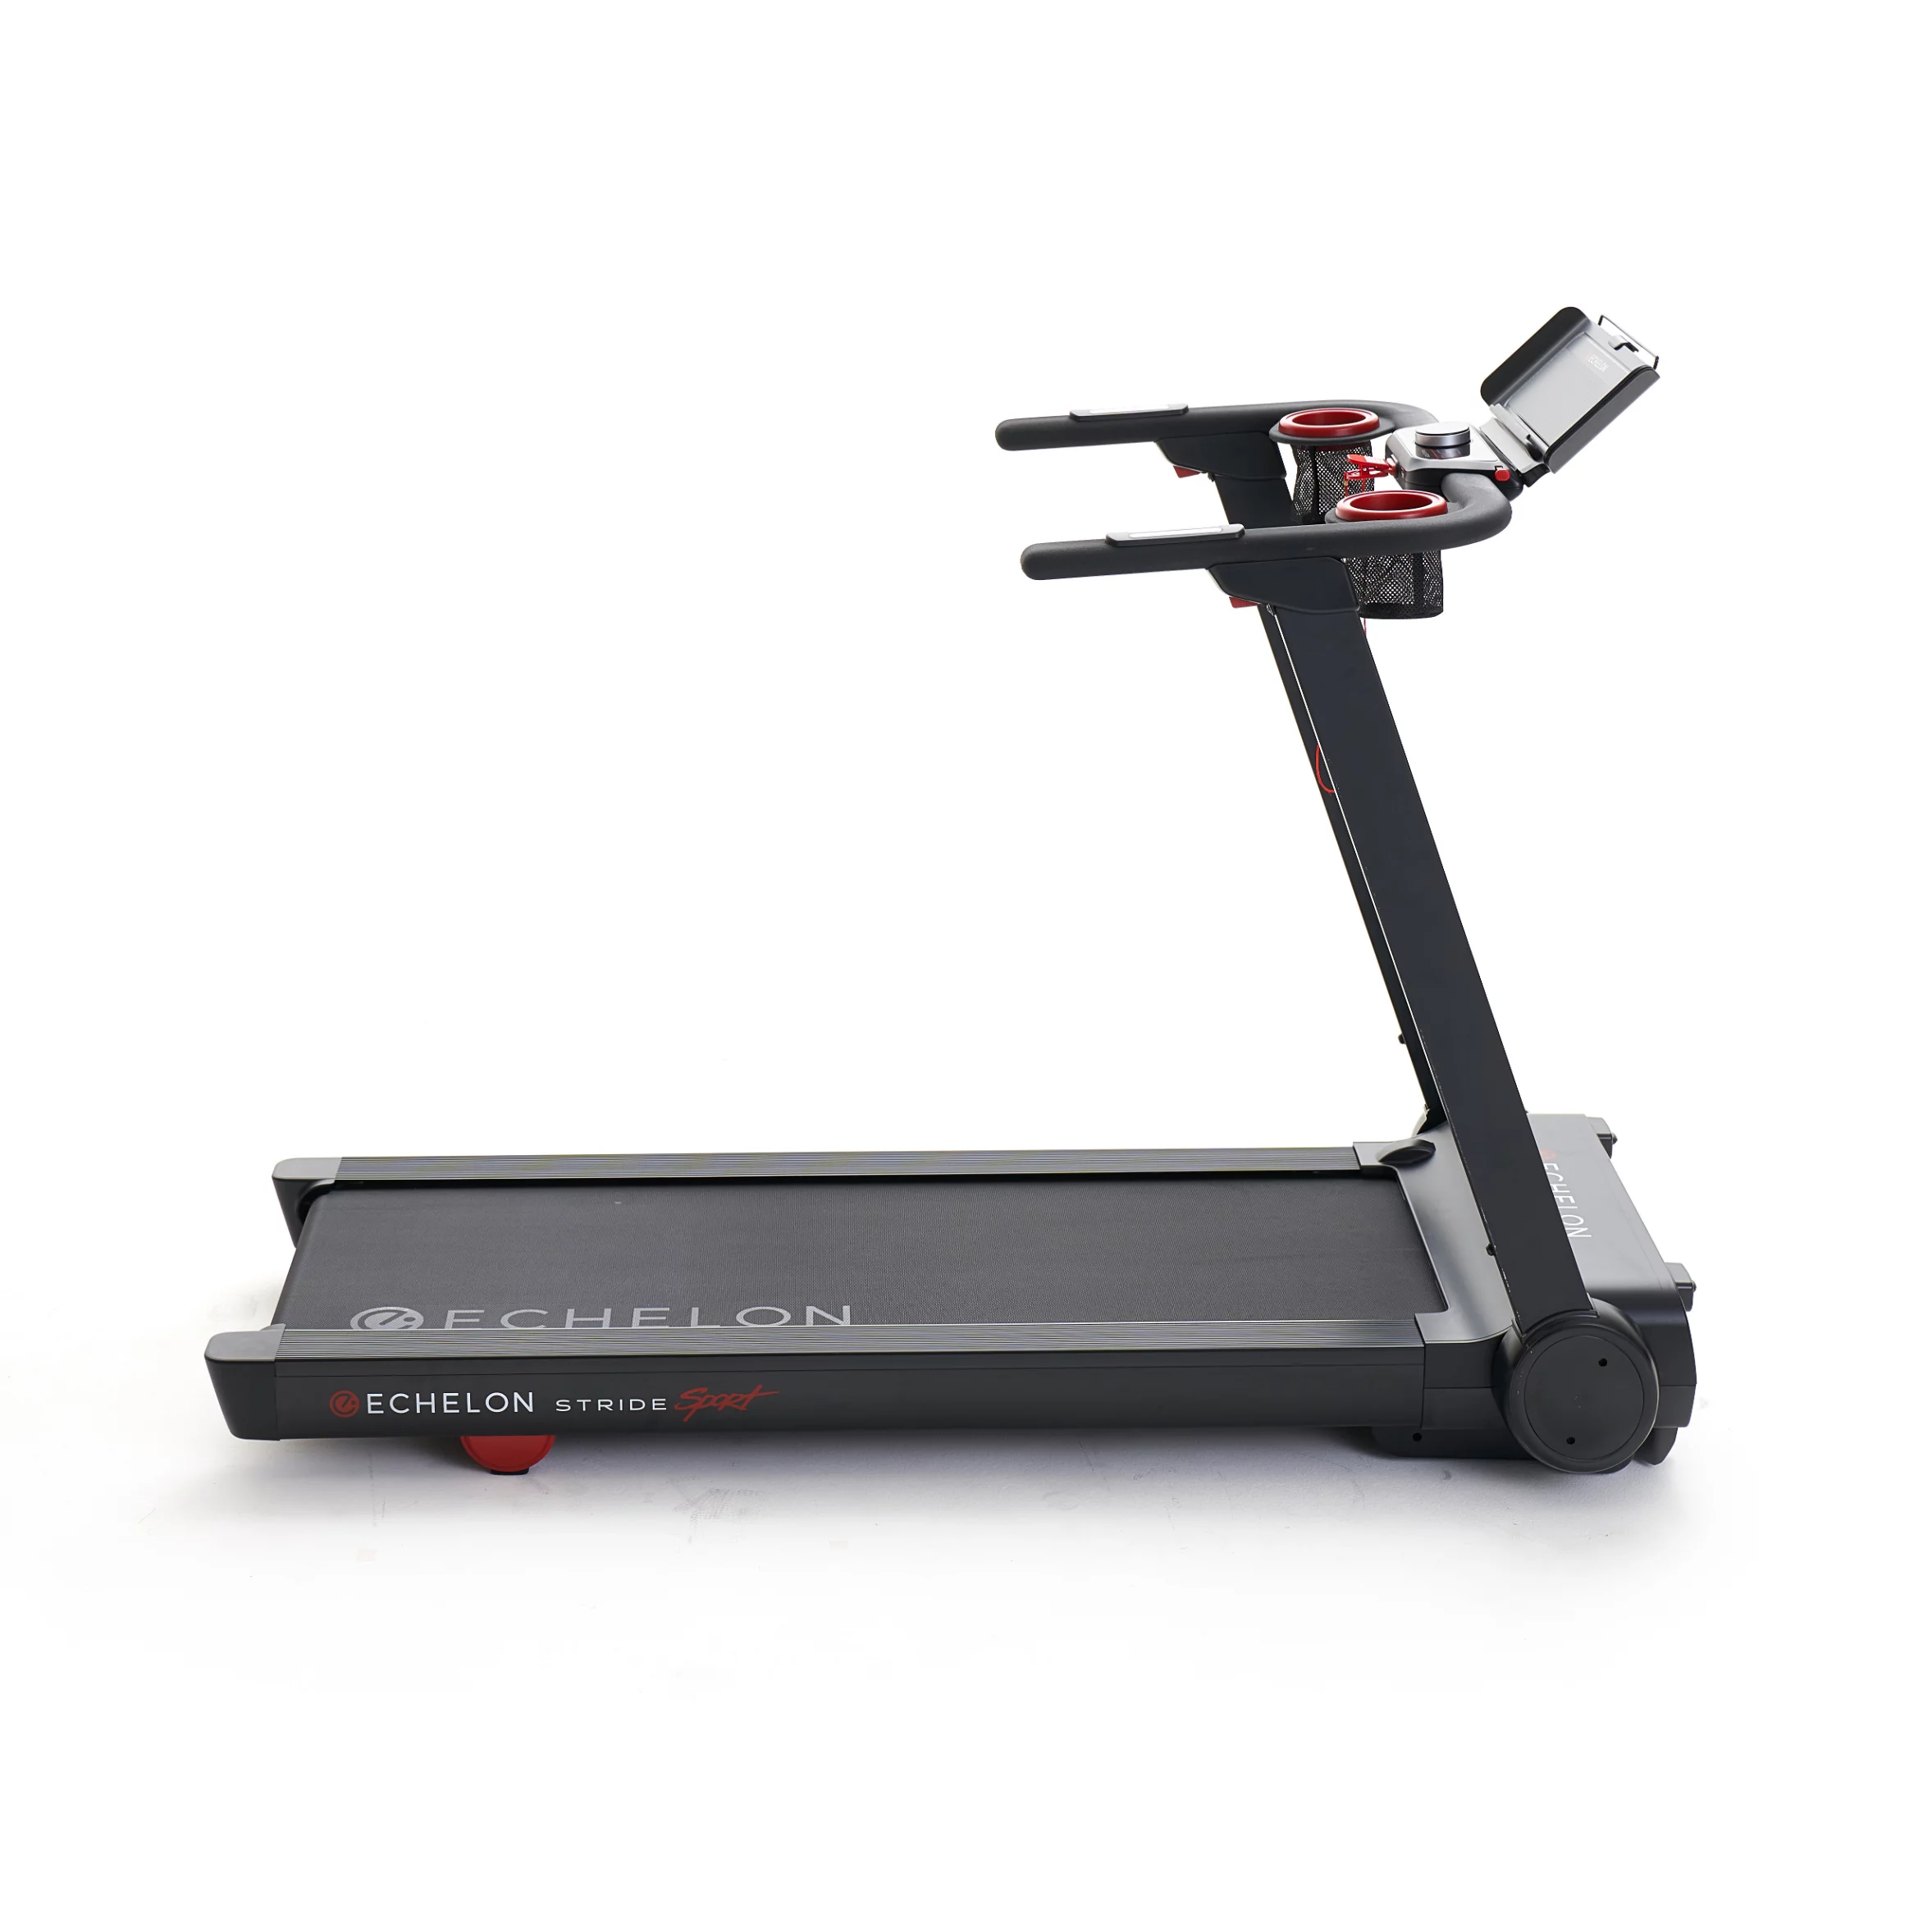 Echelon Stride Sport Auto-Fold Compact Treadmill with 12 Levels of Incline, 1.5 HP + 30-Day Free Membership